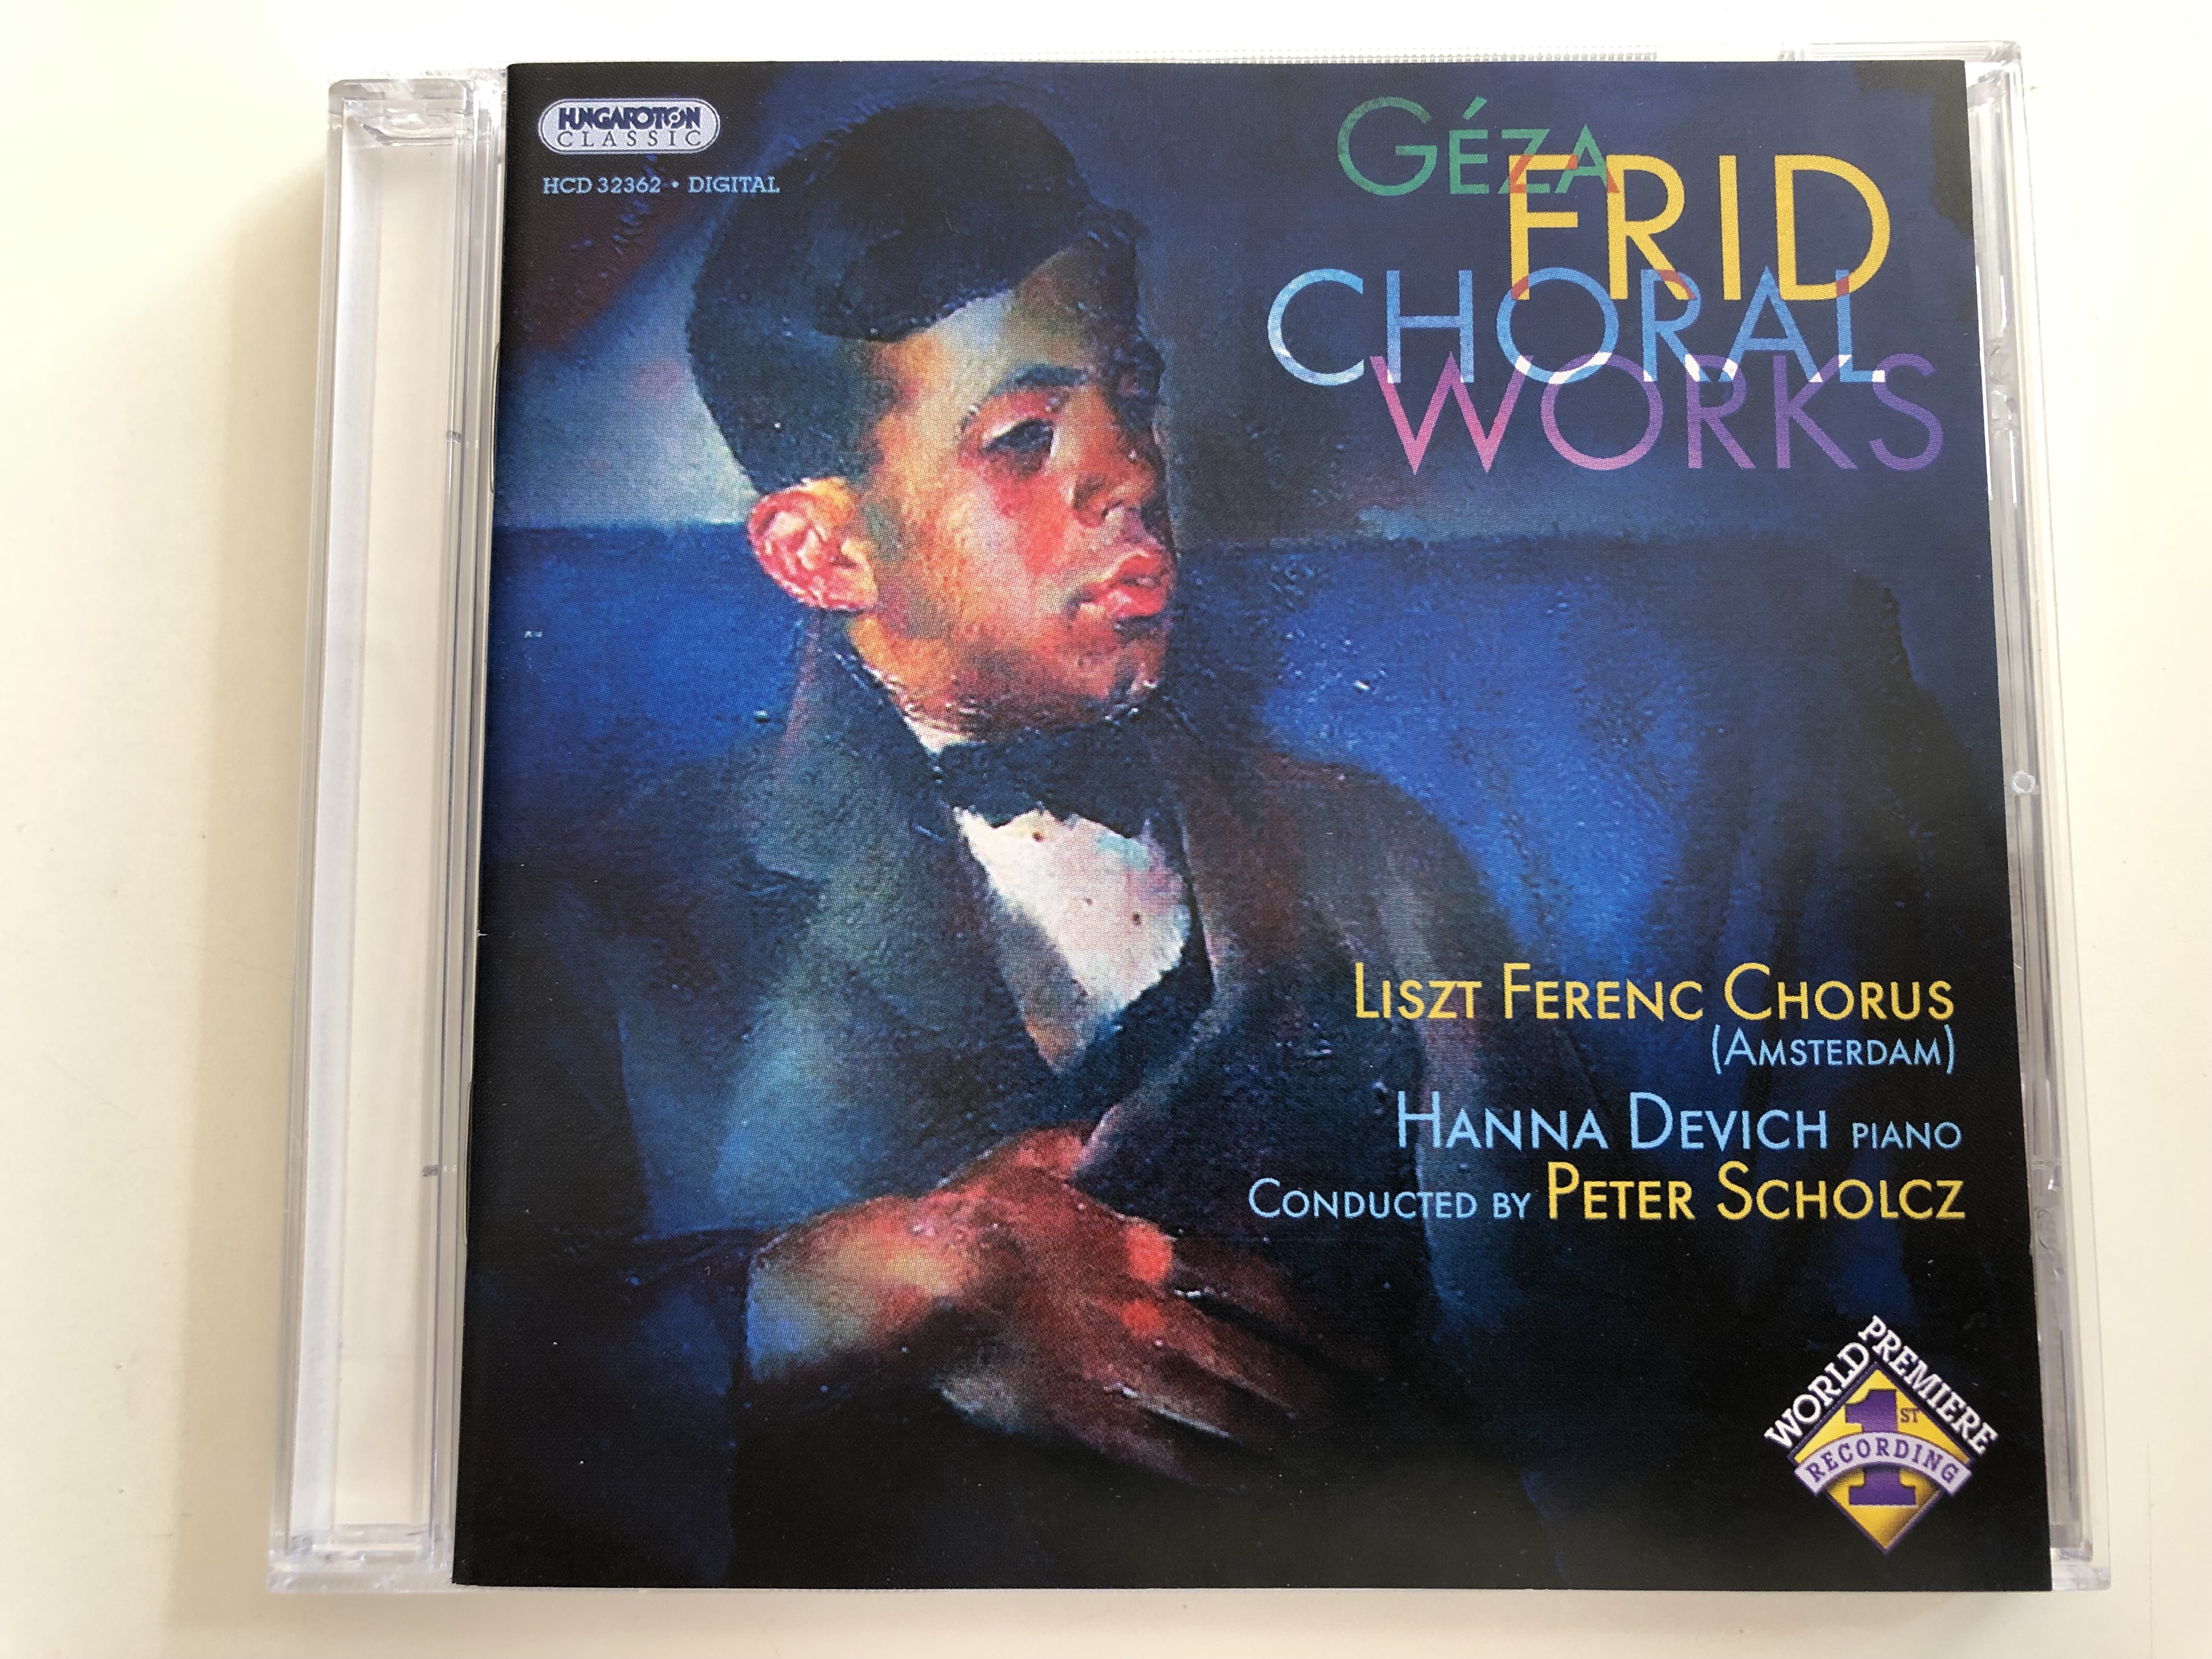 g-za-frid-choral-works-liszt-ferenc-chorus-amsterdam-hanna-devich-piano-conducted-by-peter-scholcz-hungaroton-classic-audio-cd-2005-hcd-32362-2-.jpg